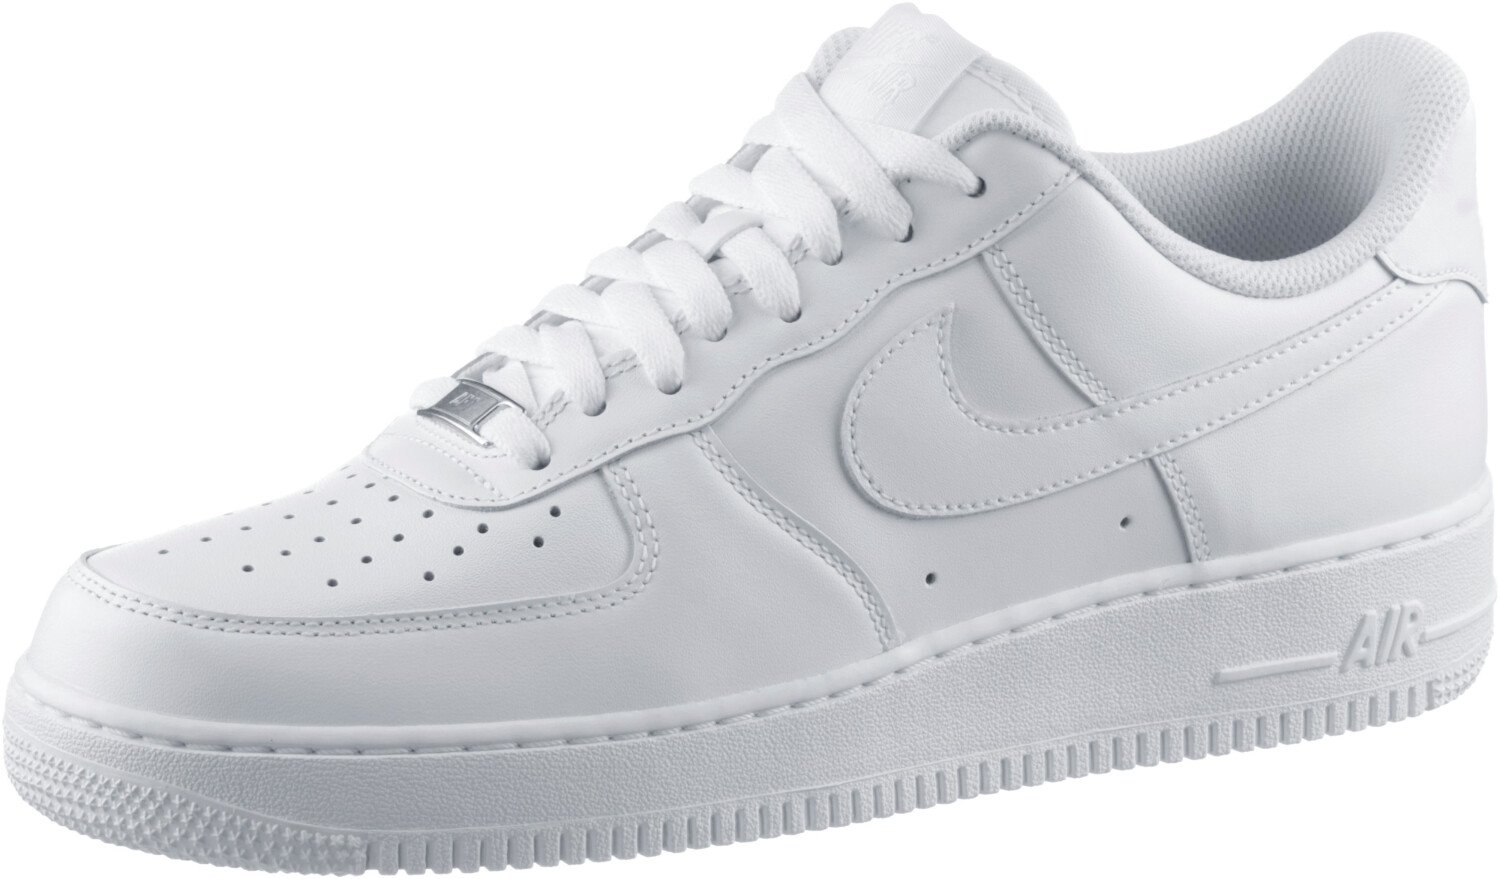 Buy Nike Air Force 1 '07 All White from £93.00 (Today) – Best Deals on ...